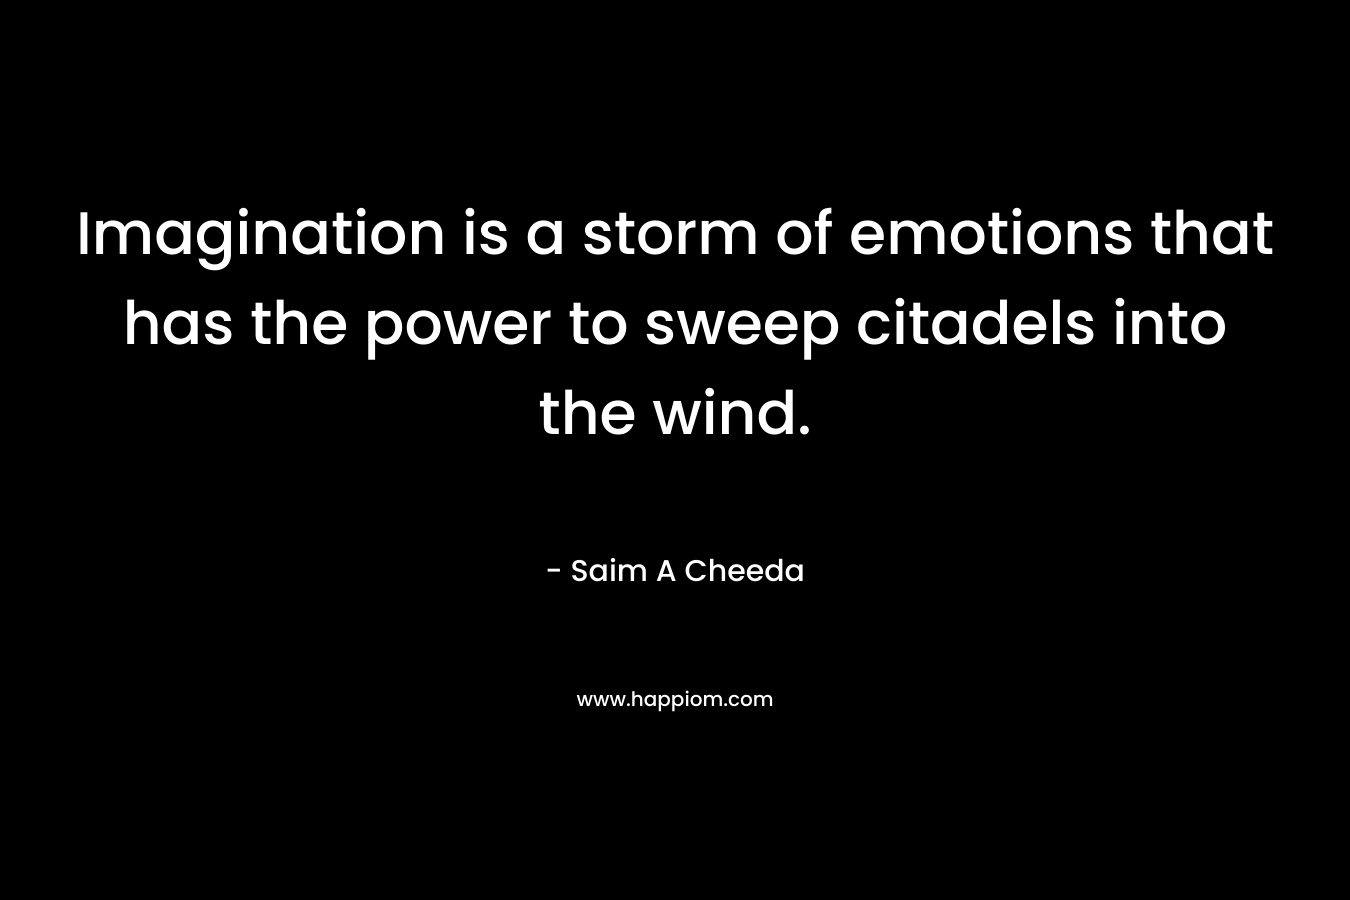 Imagination is a storm of emotions that has the power to sweep citadels into the wind. – Saim A Cheeda